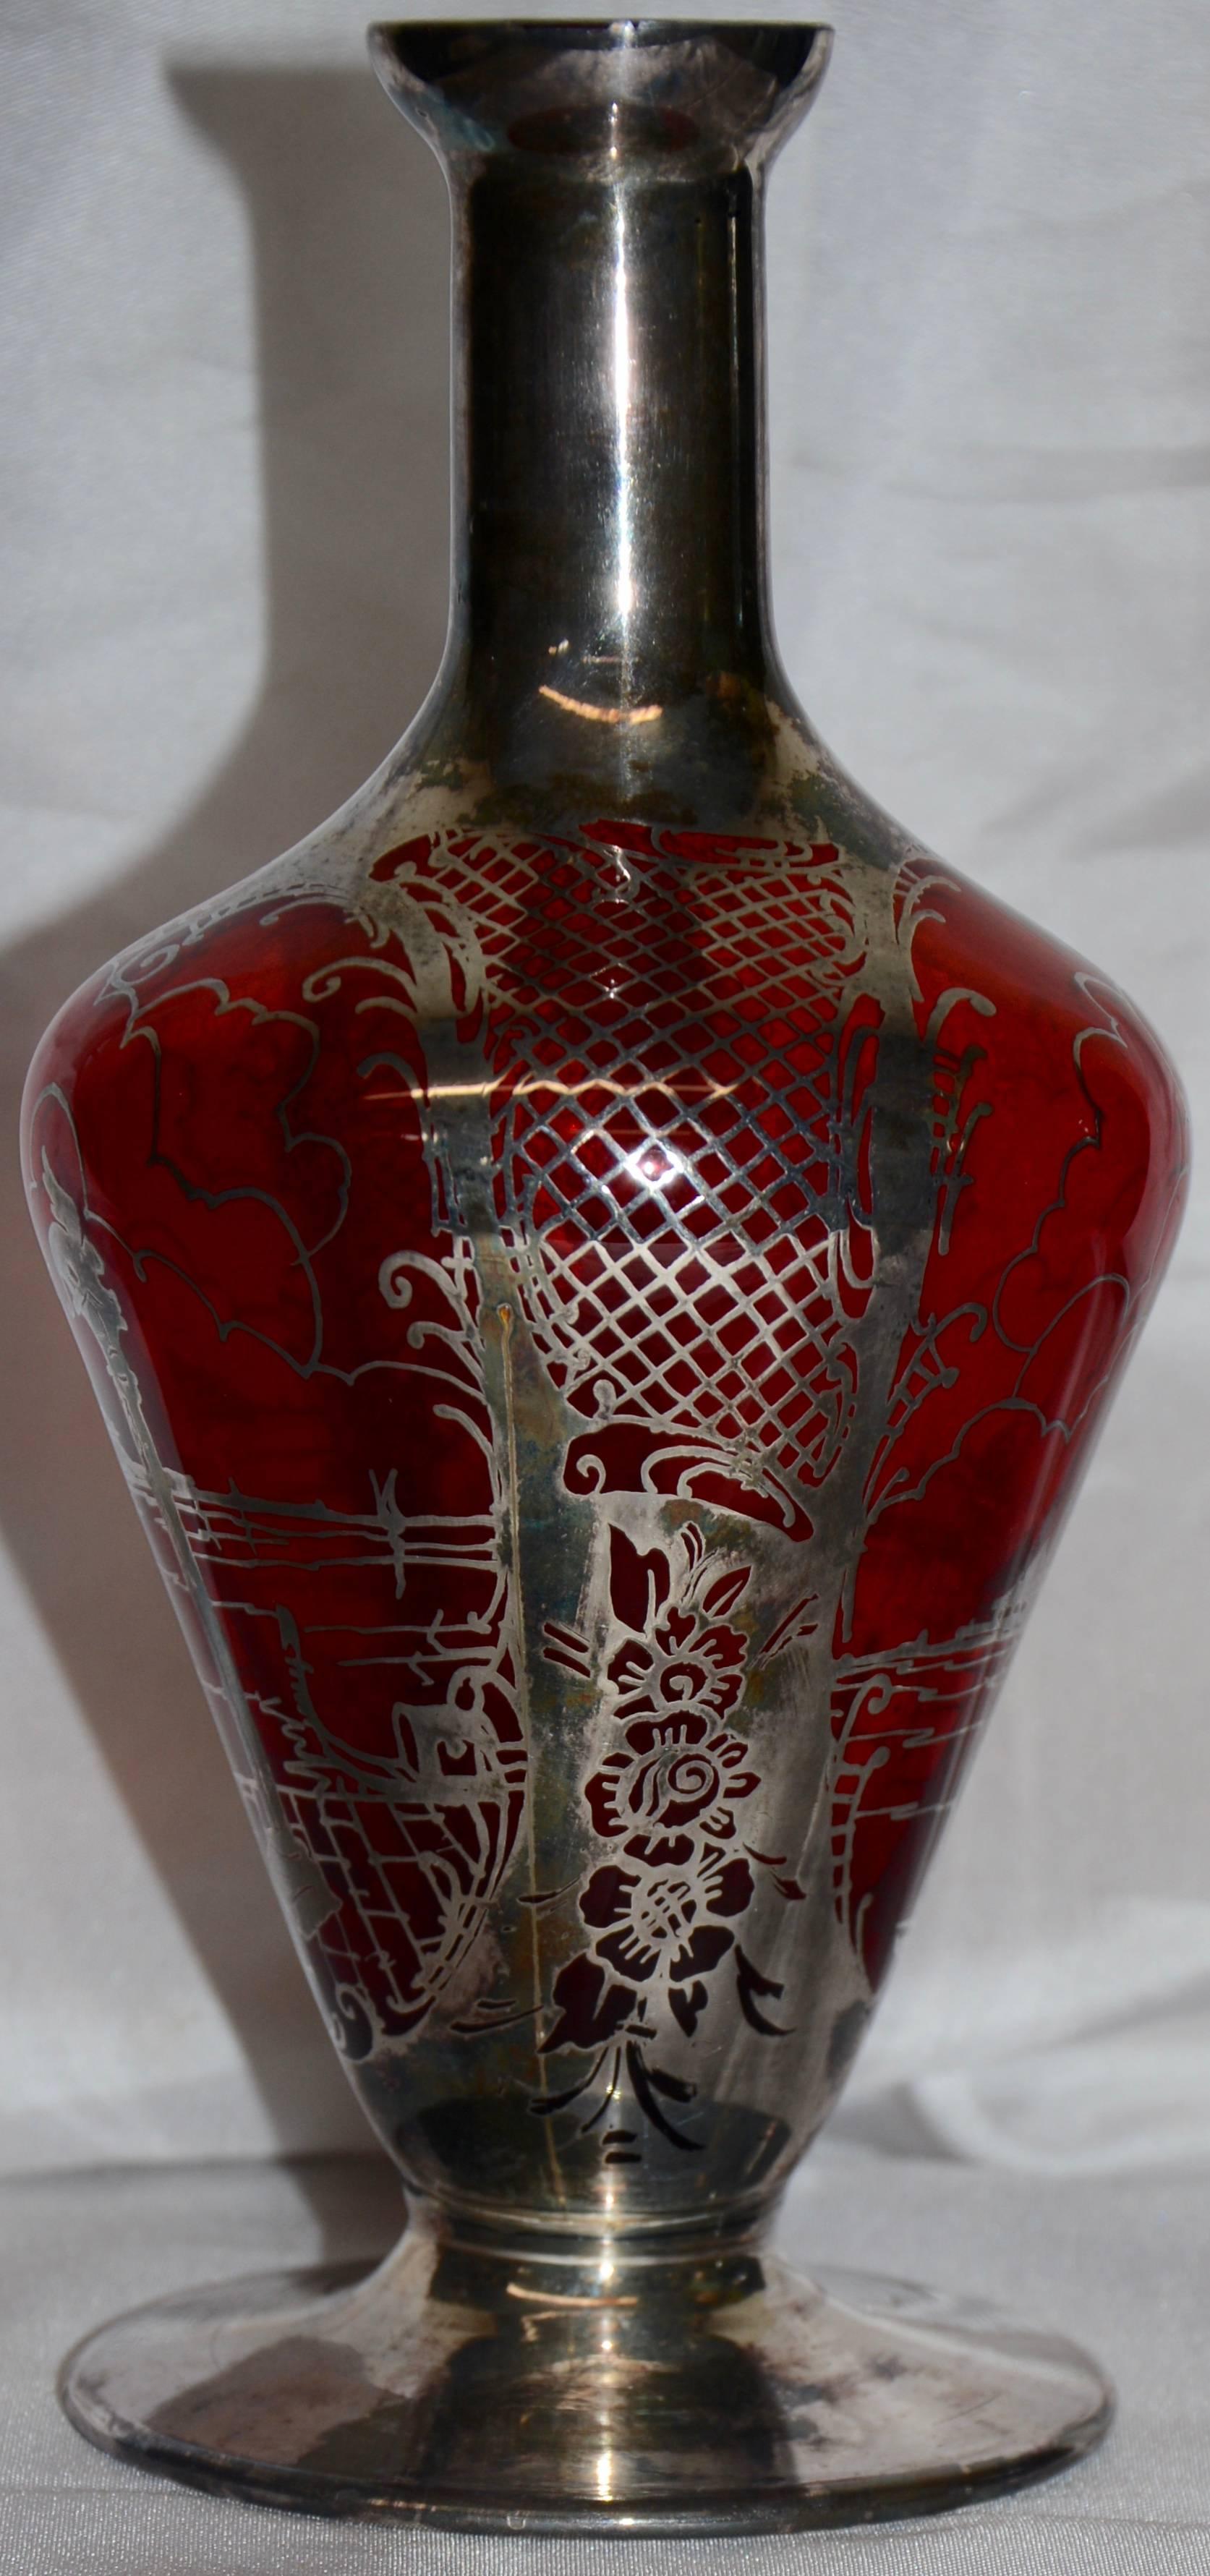 This is a lovely Art Nouveau vase formed of ruby red glass with a delicate silver overlay. Dainty lattice work tops an array of flowers on two sides and an outdoor scene is captured on the other two sides.